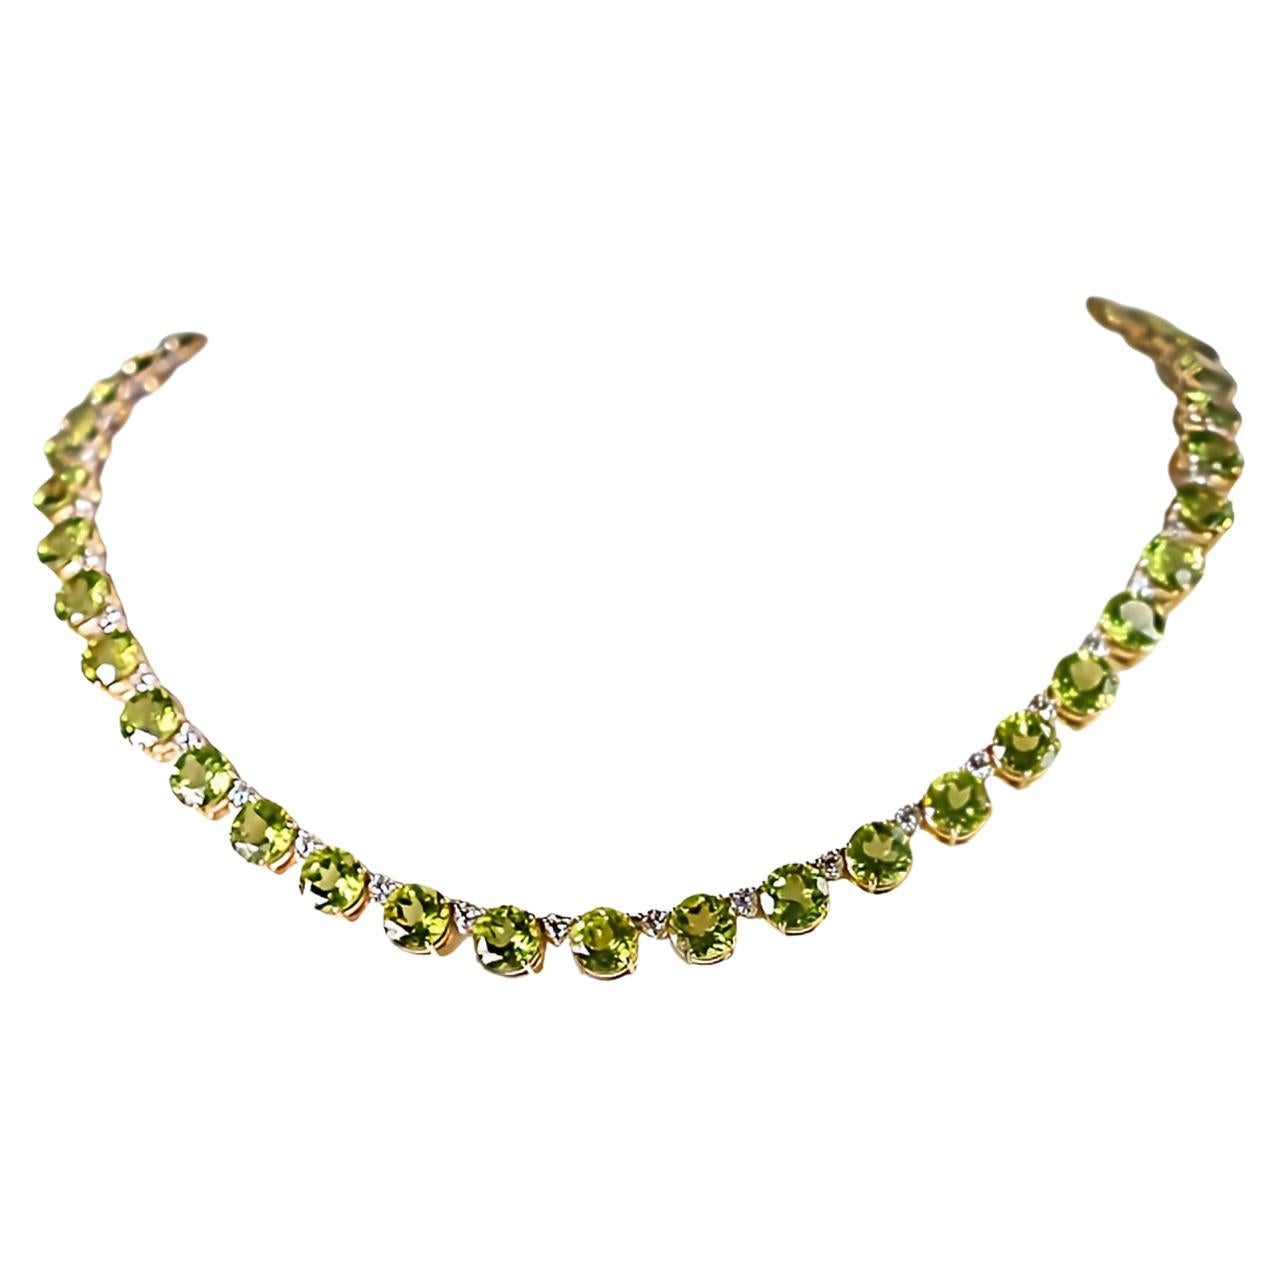 Nature's Palette: Elegant Necklace with White Diamonds and Peridot Greens For Sale